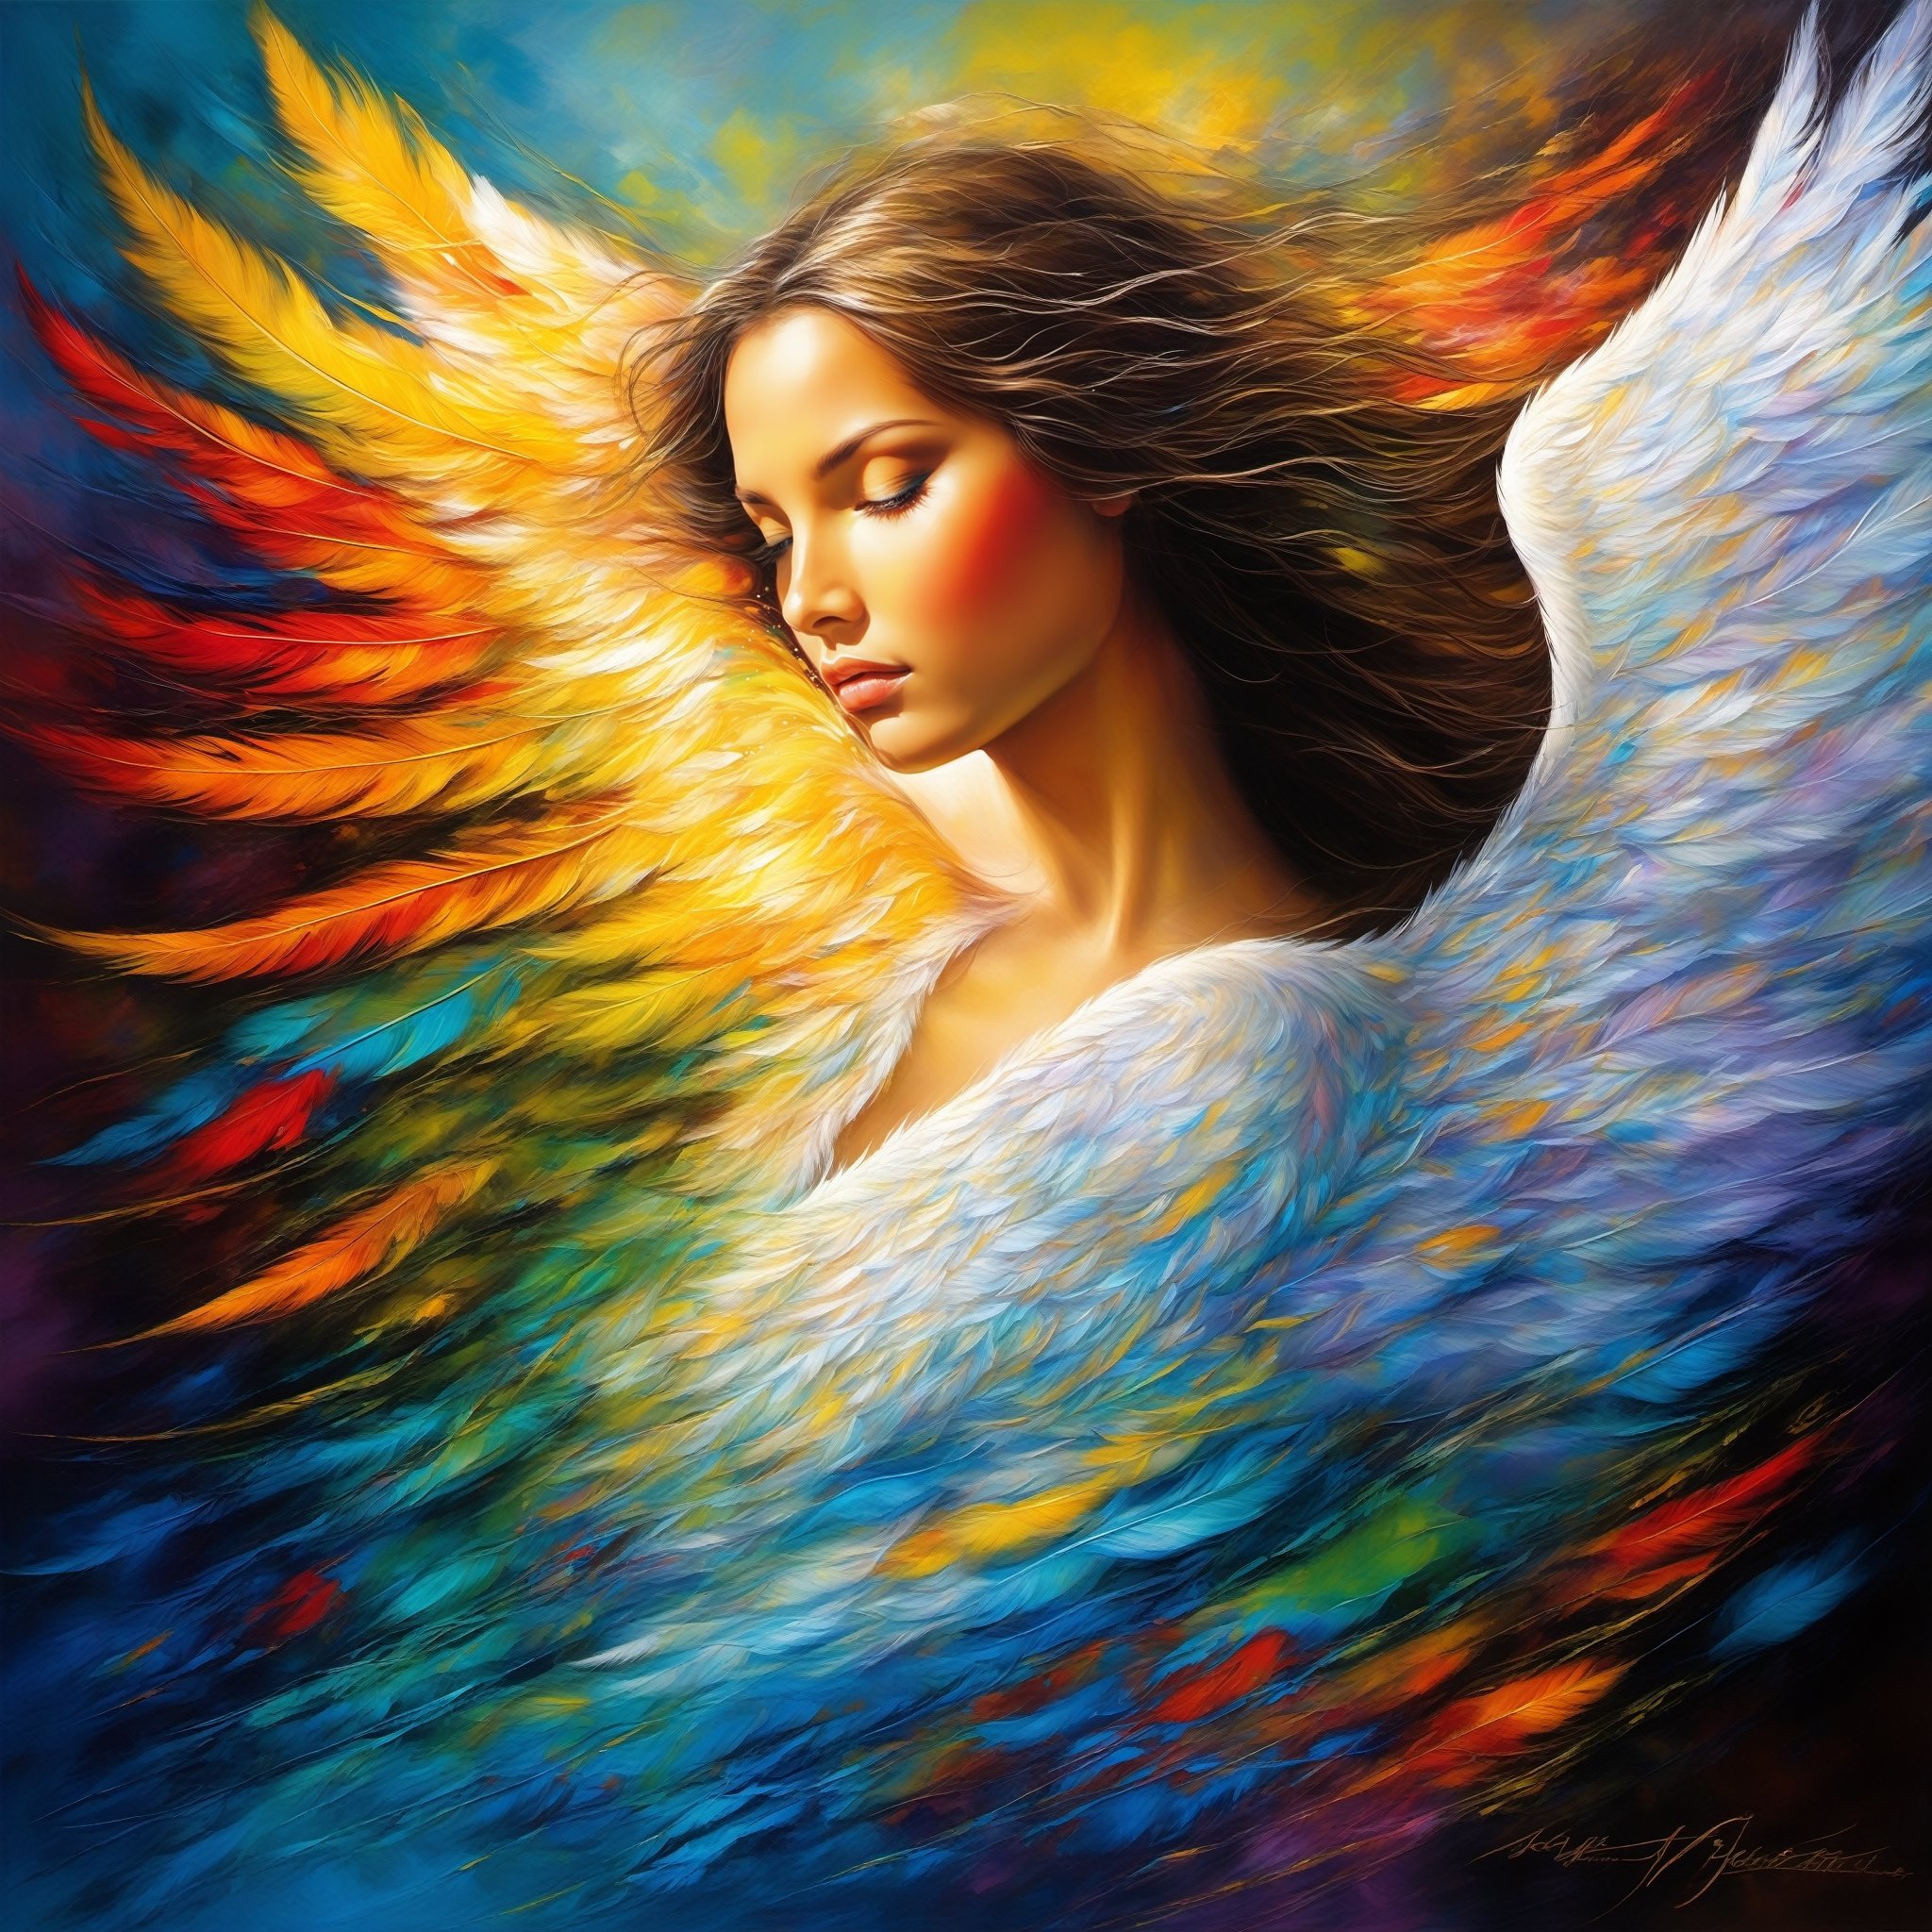 Bold strokes and thick paint capture the essence of an angel's grace. Flowing lines suggest a background of feathered wings, while vibrant dabs of color radiate from the focal point. The central form is loosely defined by energetic brushwork, evoking a young woman with compassion in her eyes. Light peeks through the texture in ethereal streams. The mood is quiet reverence, emphasized by minimal distinguishable details. Overall, the poignant impressions and luminous textures express the holy manifested in the mundane. Abstract elements combine in poetic celebration of human connection channeling the divine.